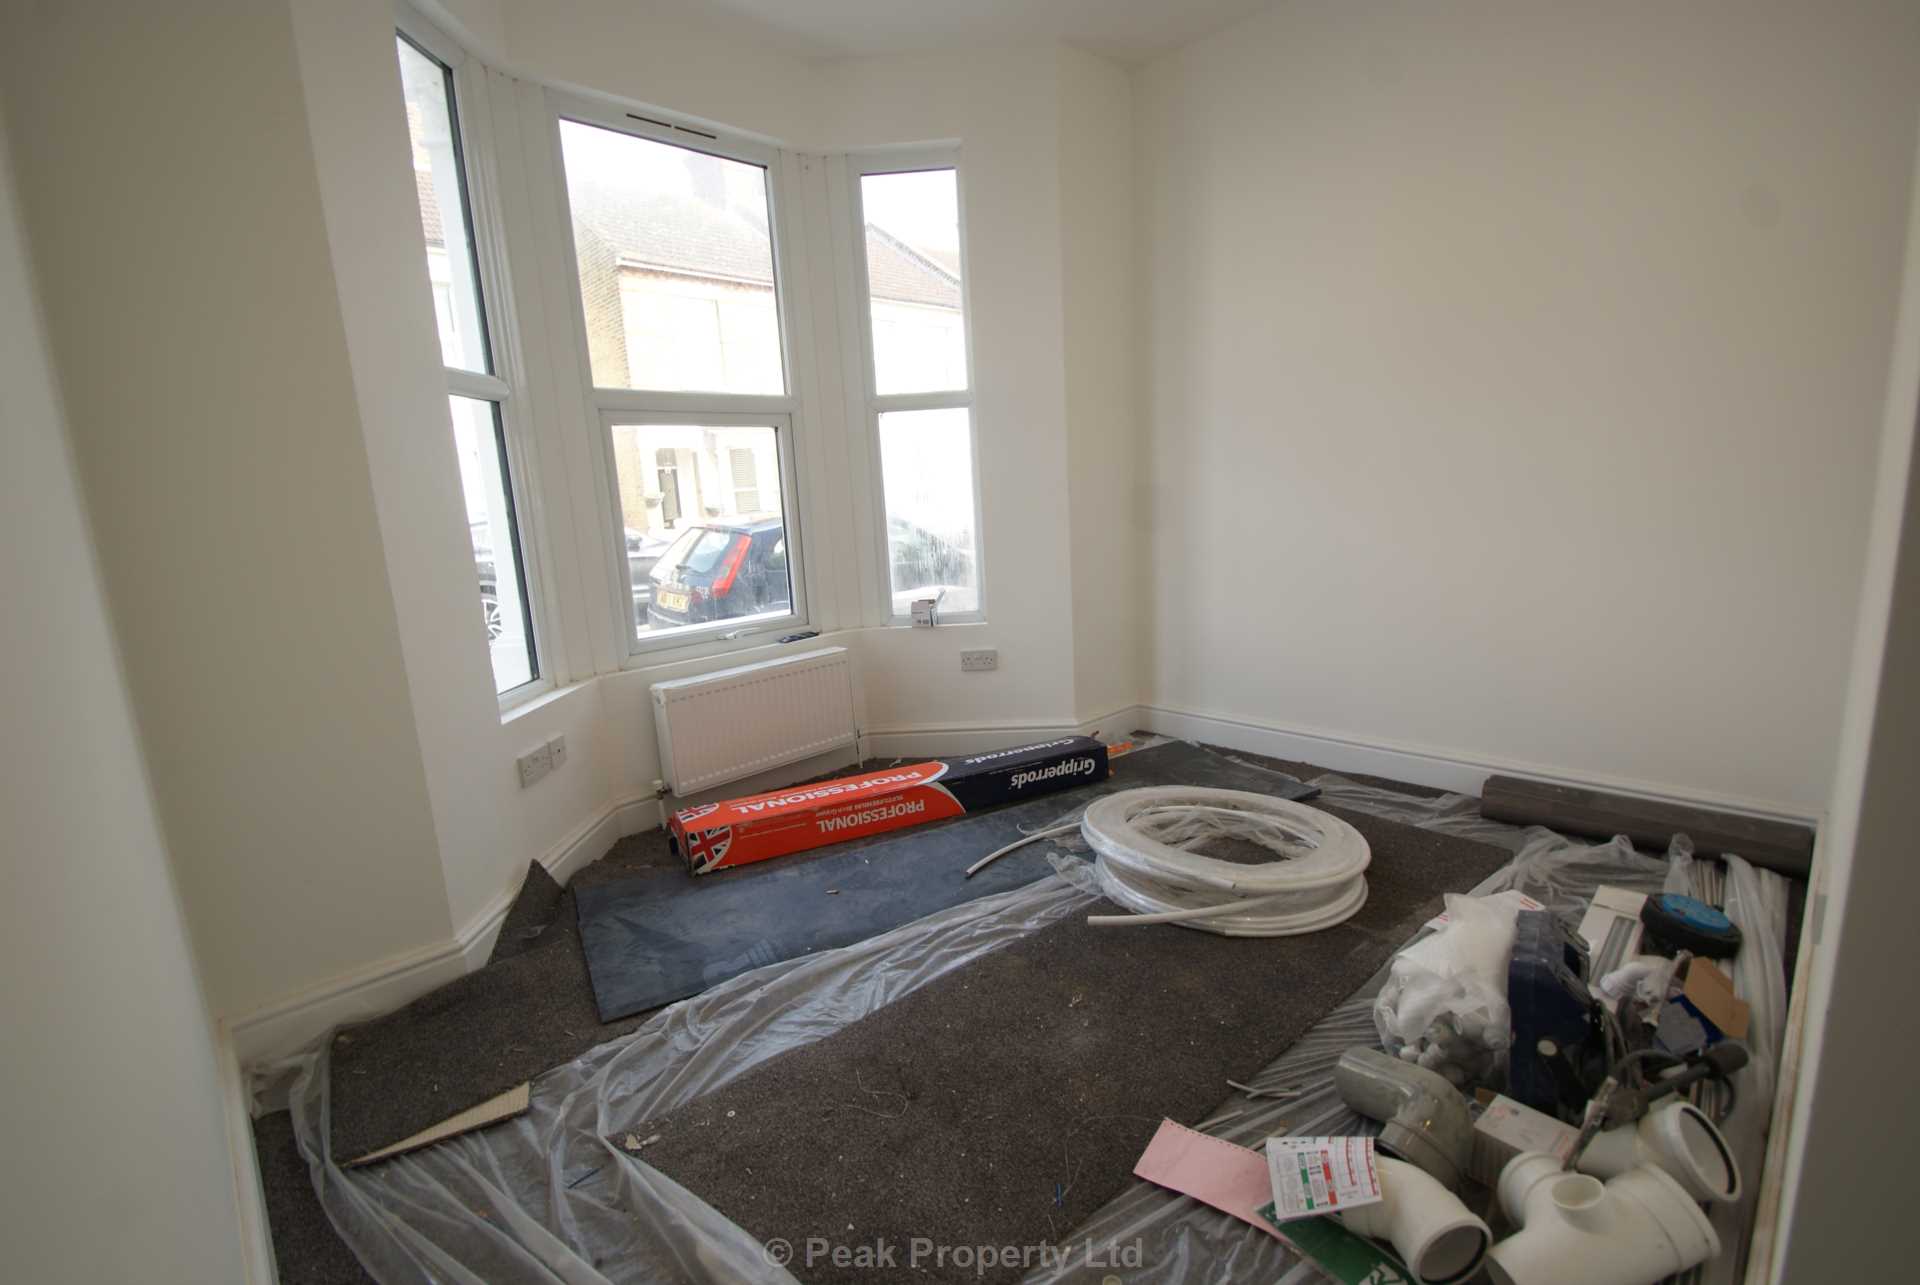 BRAND NEW - HIGH QUALITY HOUSE SHARE  - EXCELLENT LOCATION Gordon Road, Southend On Sea, Image 9